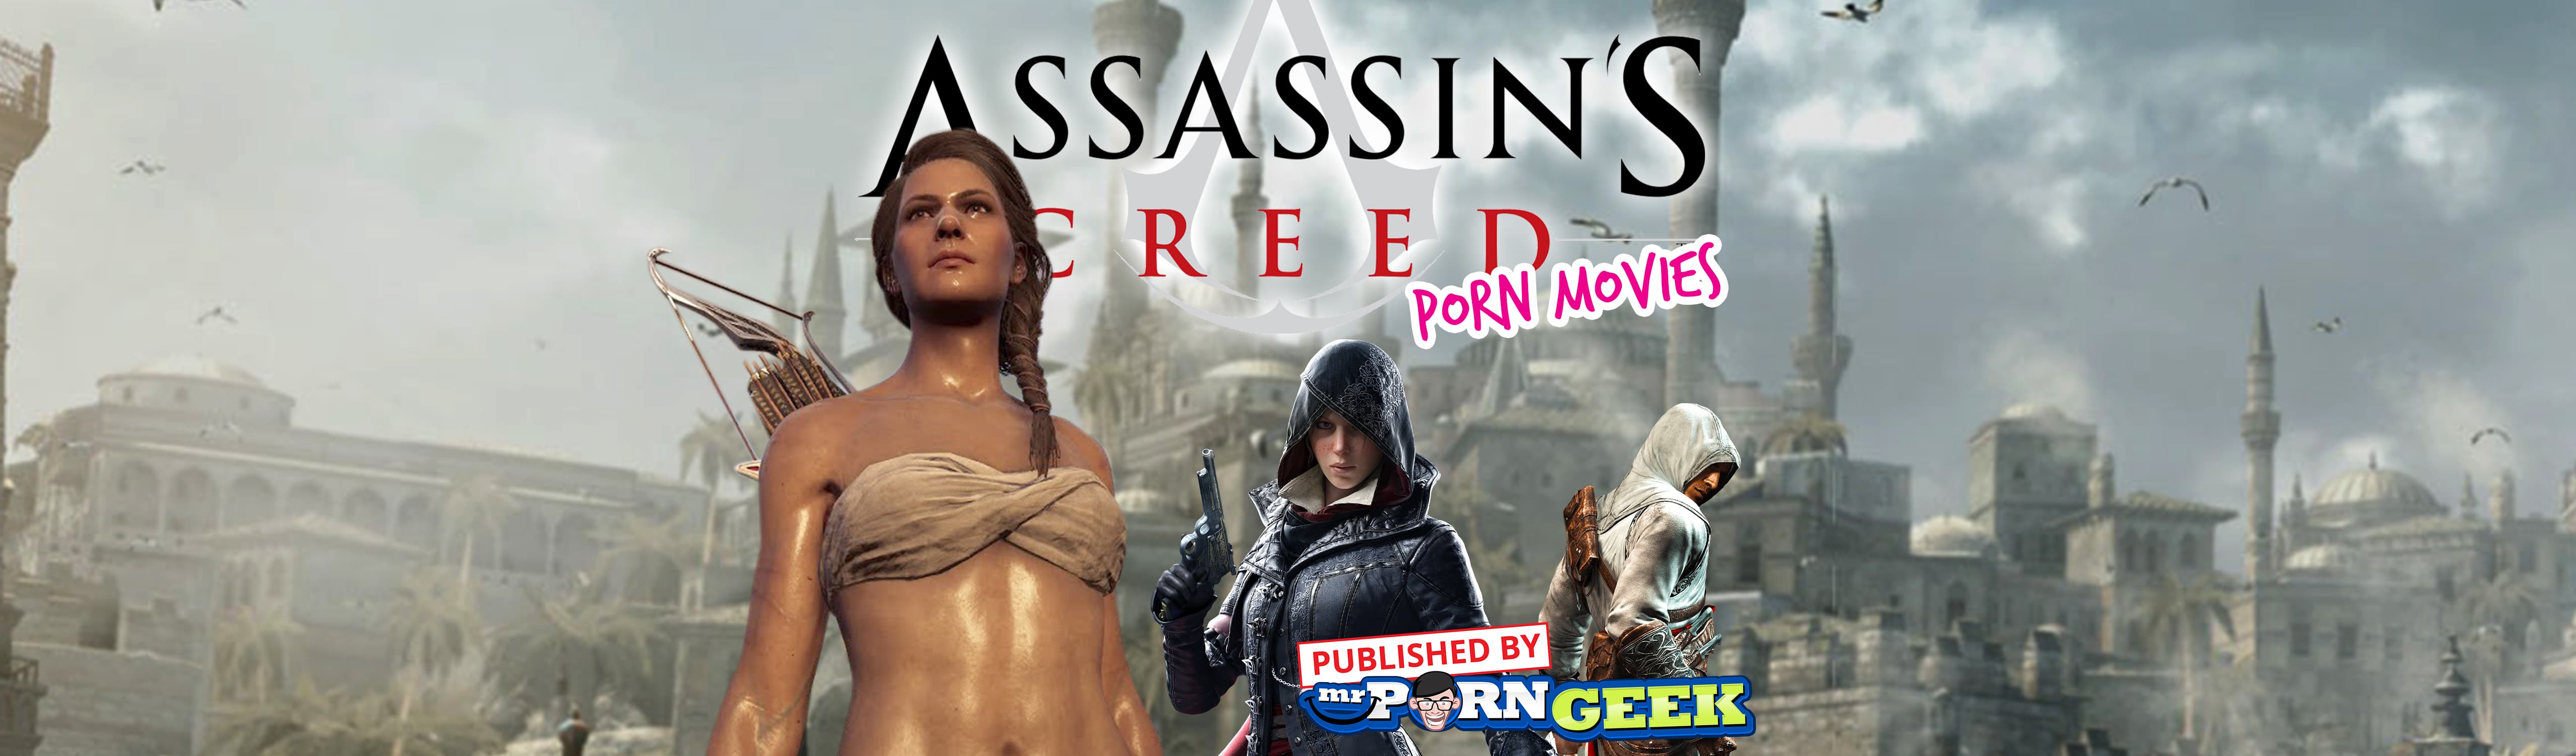 Assassins Creed Porn Videos - Top Assassins Creed Porn Movies Are At Mr. Porn Geek